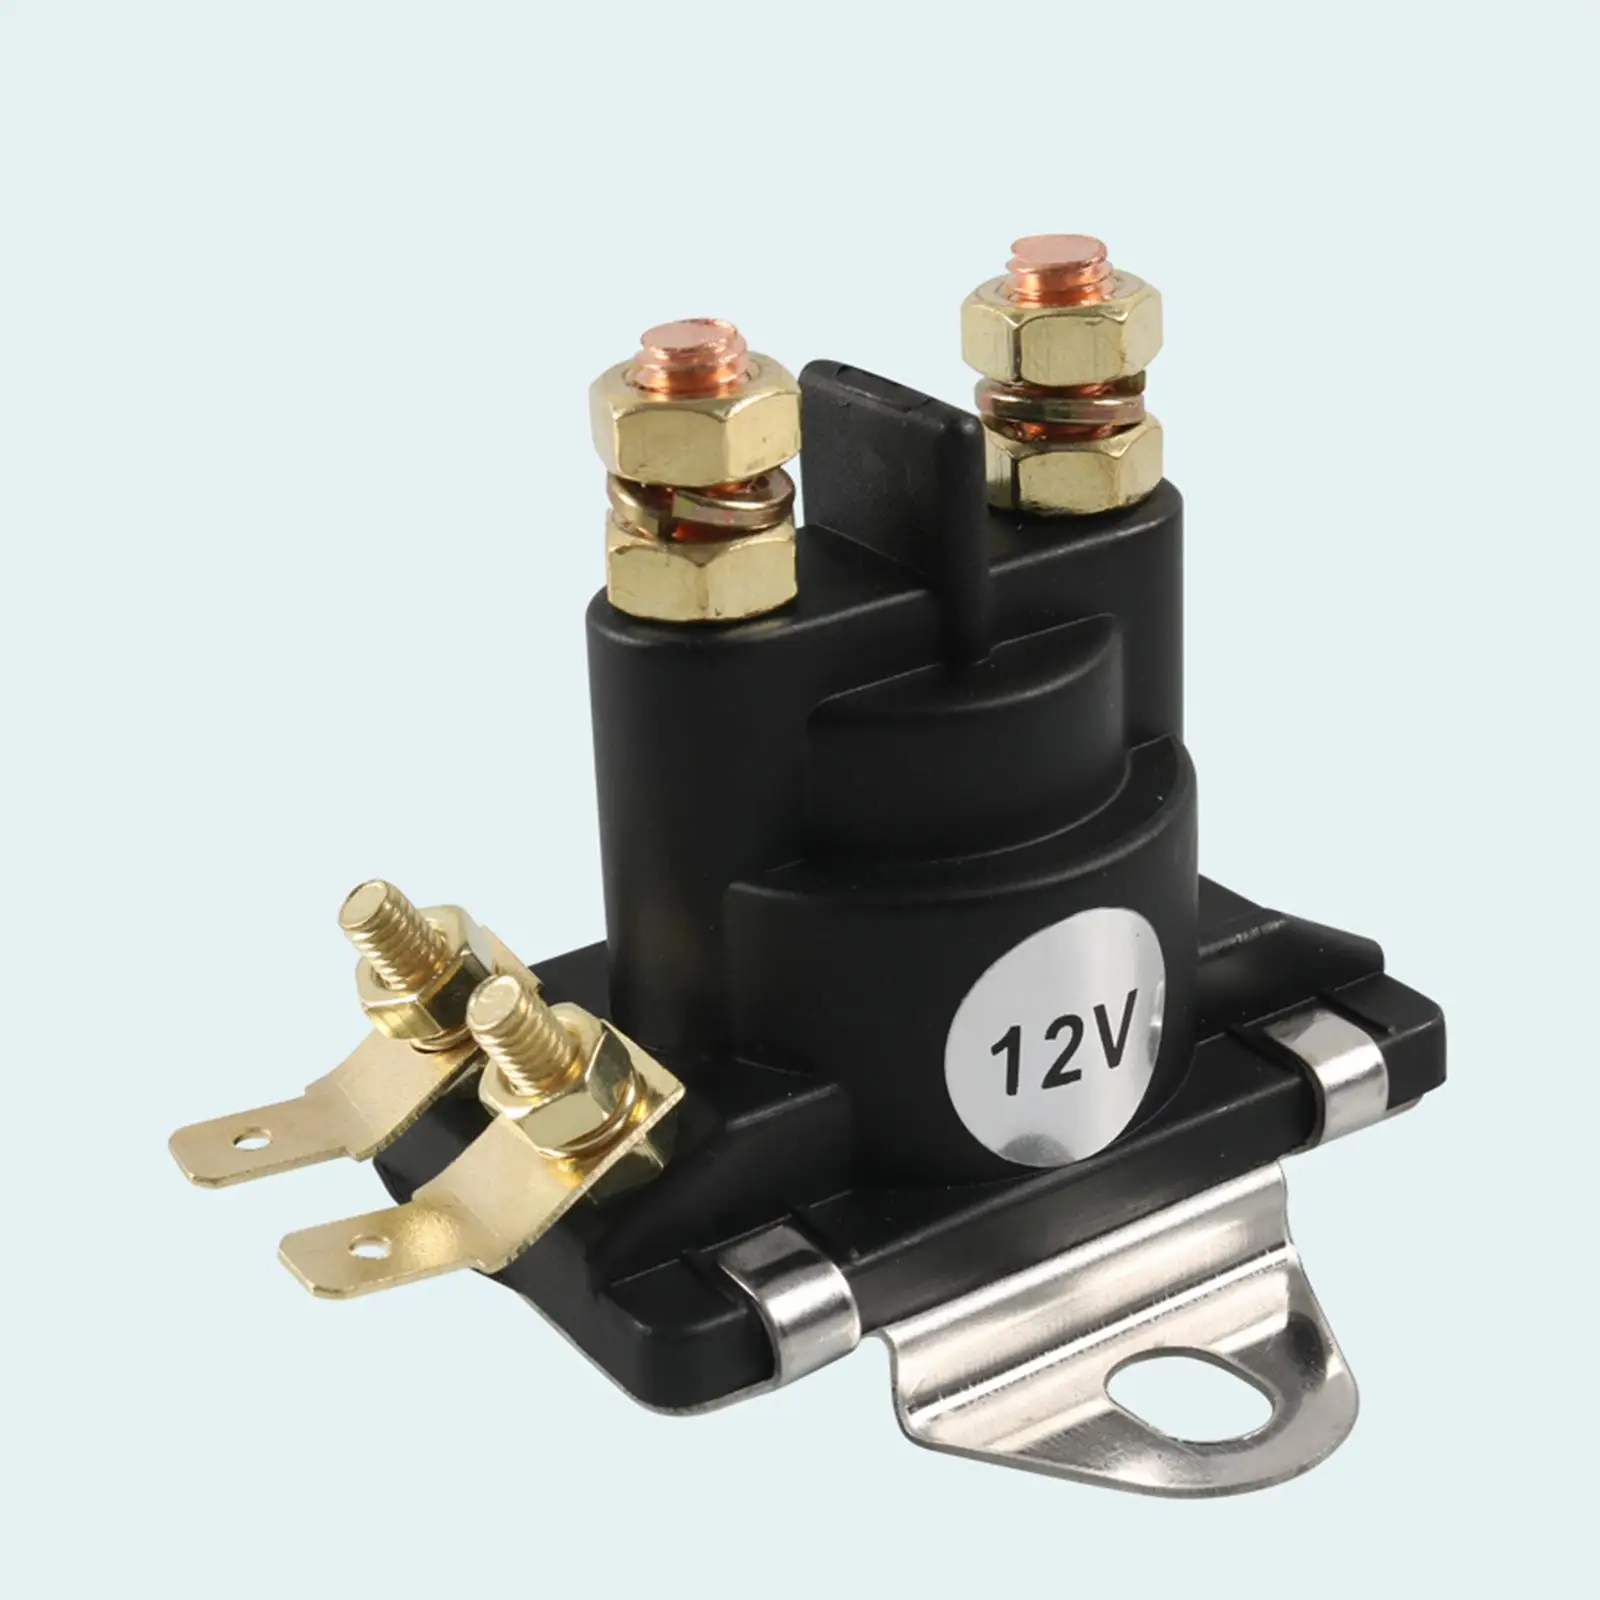 Solenoid Relay Switch 89-818997A1 for Mariner Outboard Motors Accessory Easily Install